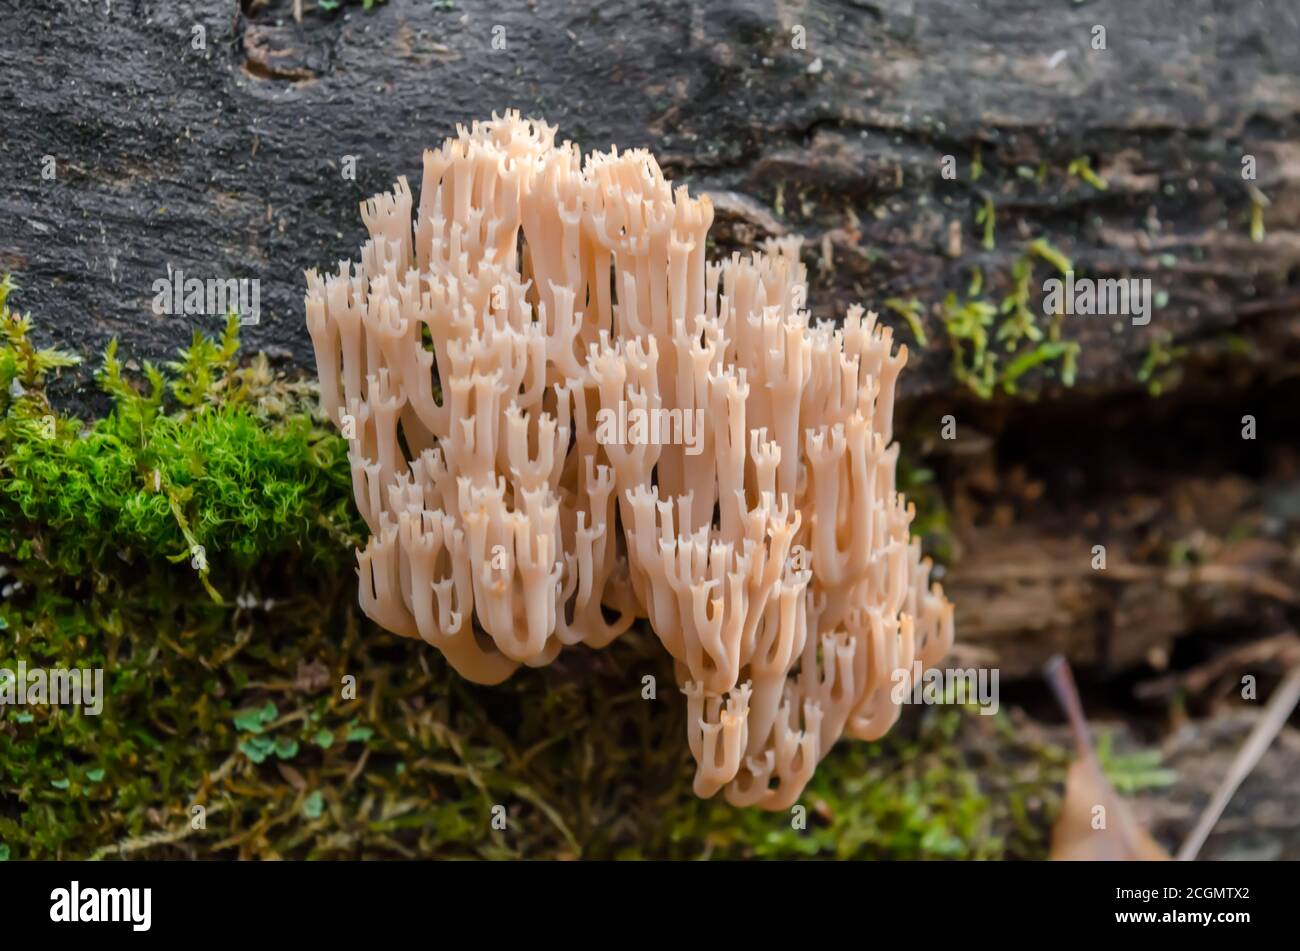 Artomyces pyxidatus fungus (also called crown coral or crown-tipped coral fungus) on a log in the forest. Ukraine. Close-up. Stock Photo